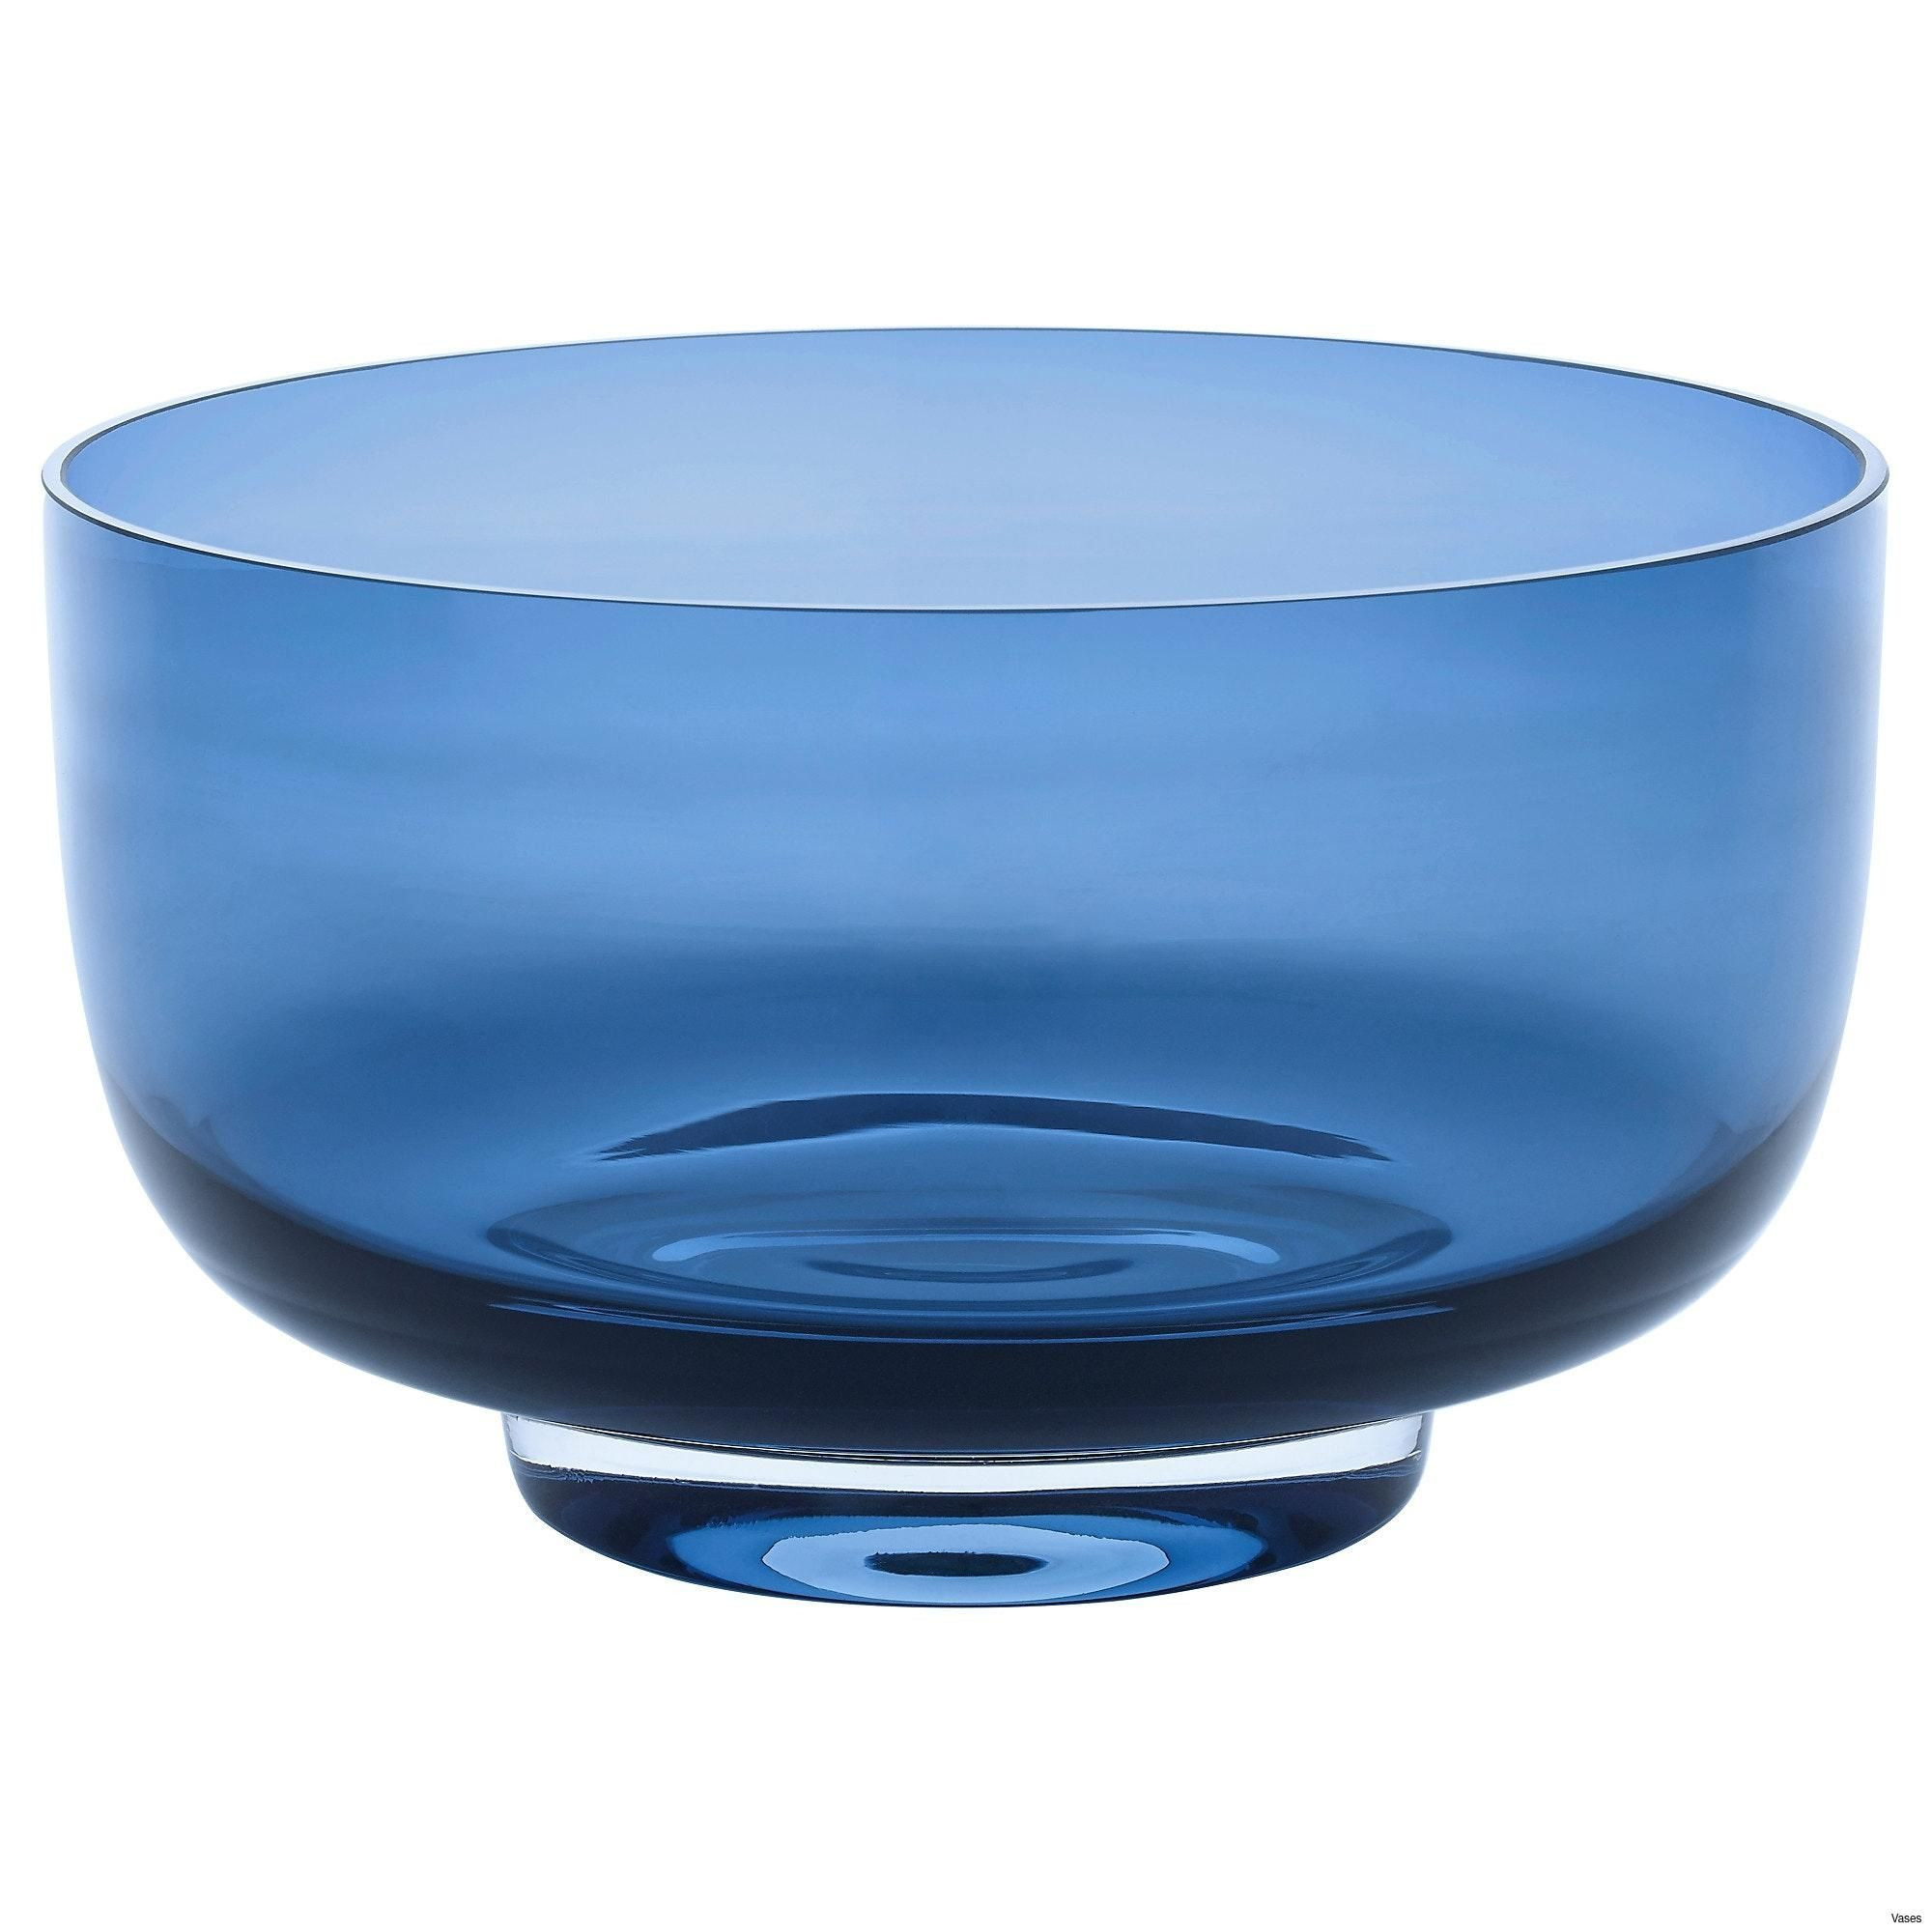 10 Fashionable Daum Glass Vase 2024 free download daum glass vase of art glass vase luxury decorative glass bowl new living room ikea throughout art glass vase luxury decorative glass bowl new living room ikea vases awesome pe s5h